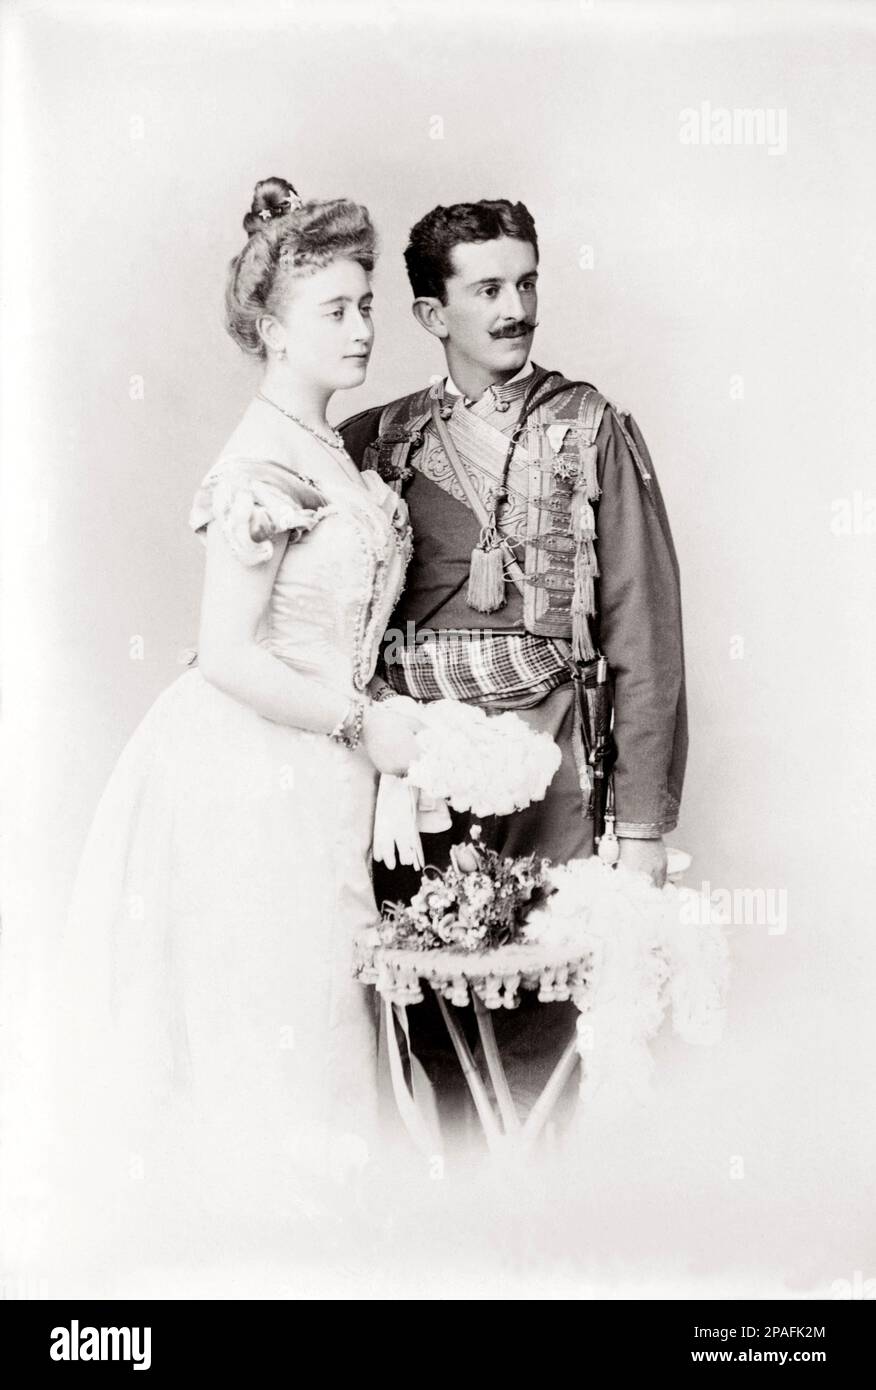 1895 ca. , Montenegro : The Crown Prince DANILO of MONTENEGRO Petrovic-Njegos ( 1871 - 1939 )  the day of wedding marriage with wife Duchess JUTTA of Mecklenburg ( 1880-1946 ) the daughter of Adolf Friedrich V, Grand Duke of Mecklenburg-Strelitz, but the marriage was childless . After he abdicated in 1921 he spent most of his life living in Nice.Son of King Nicholas I and Queen Milena of Montenegro . From March 1, 1921 - March 7, 1921 Danilo was the self-assumed King of Montenegro leading an unrecognised Government-in-exile. On March 7 1921 for reasons which are still unclear Danilo abdicated Stock Photo